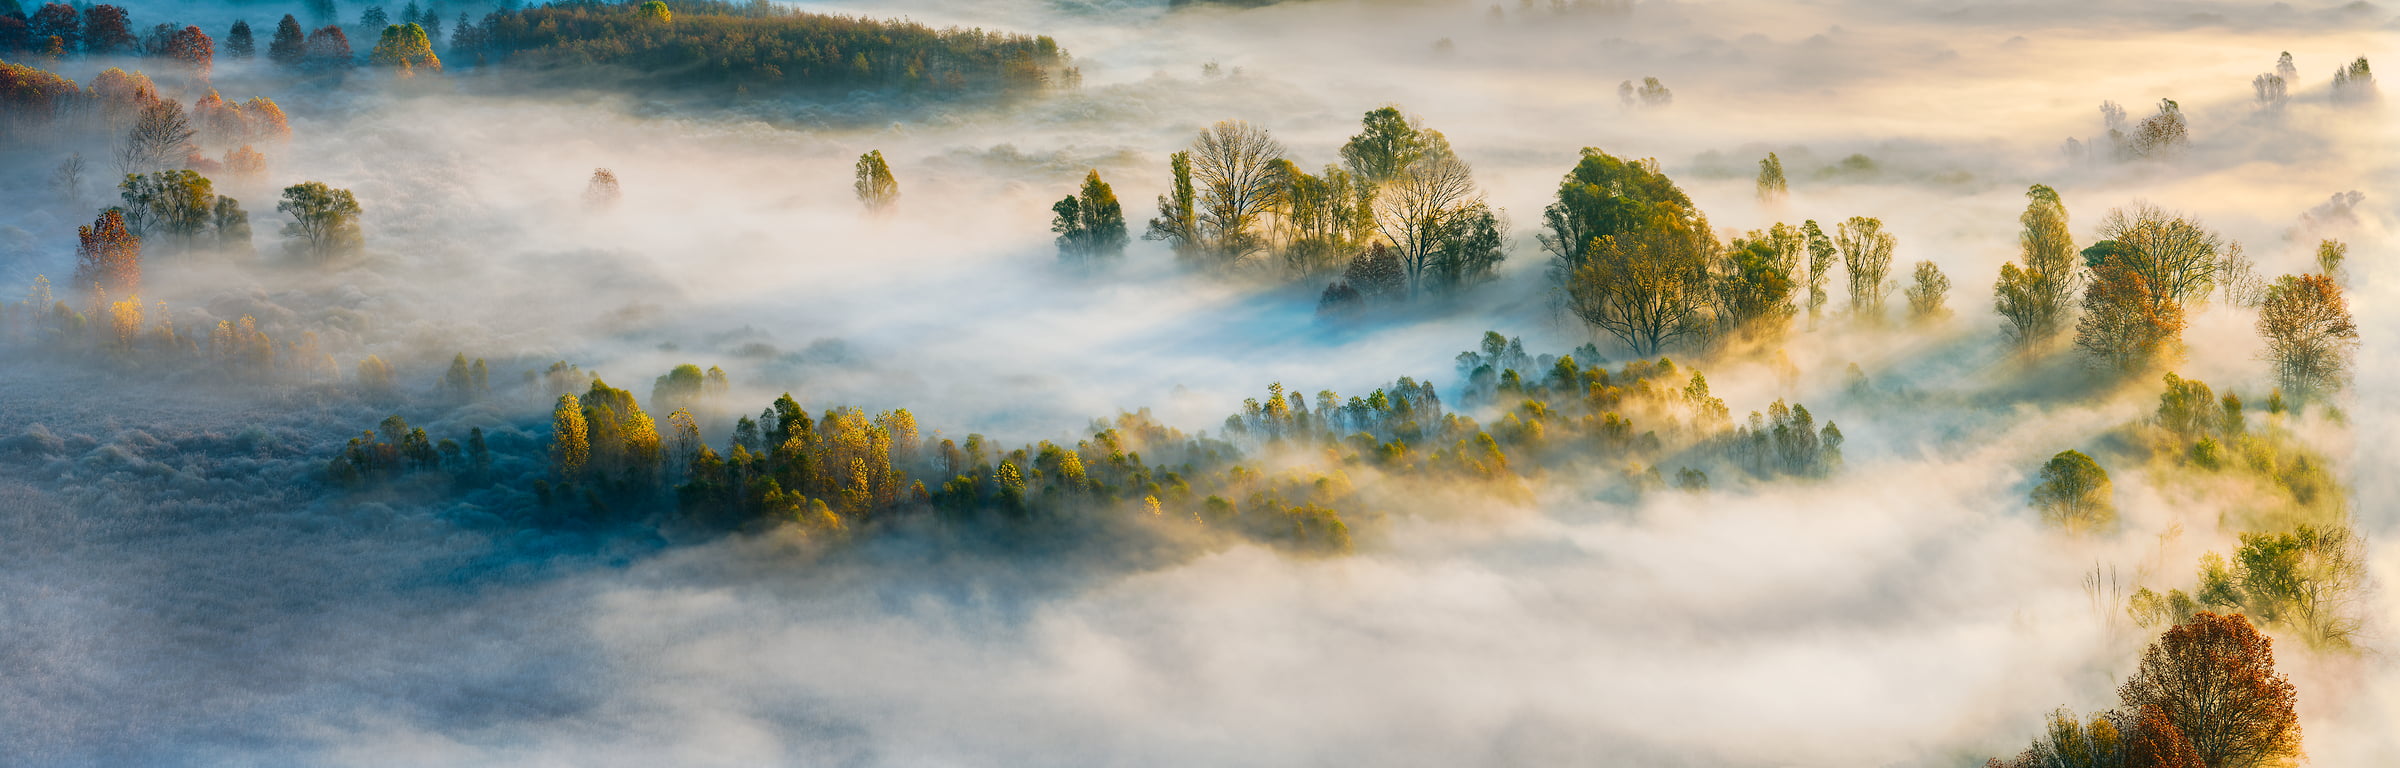 197 megapixels! A very high resolution, large-format VAST photo print of trees and fog; landscape photograph created by Ennio Pozzetti in Airuno, Lombardia, Italy.